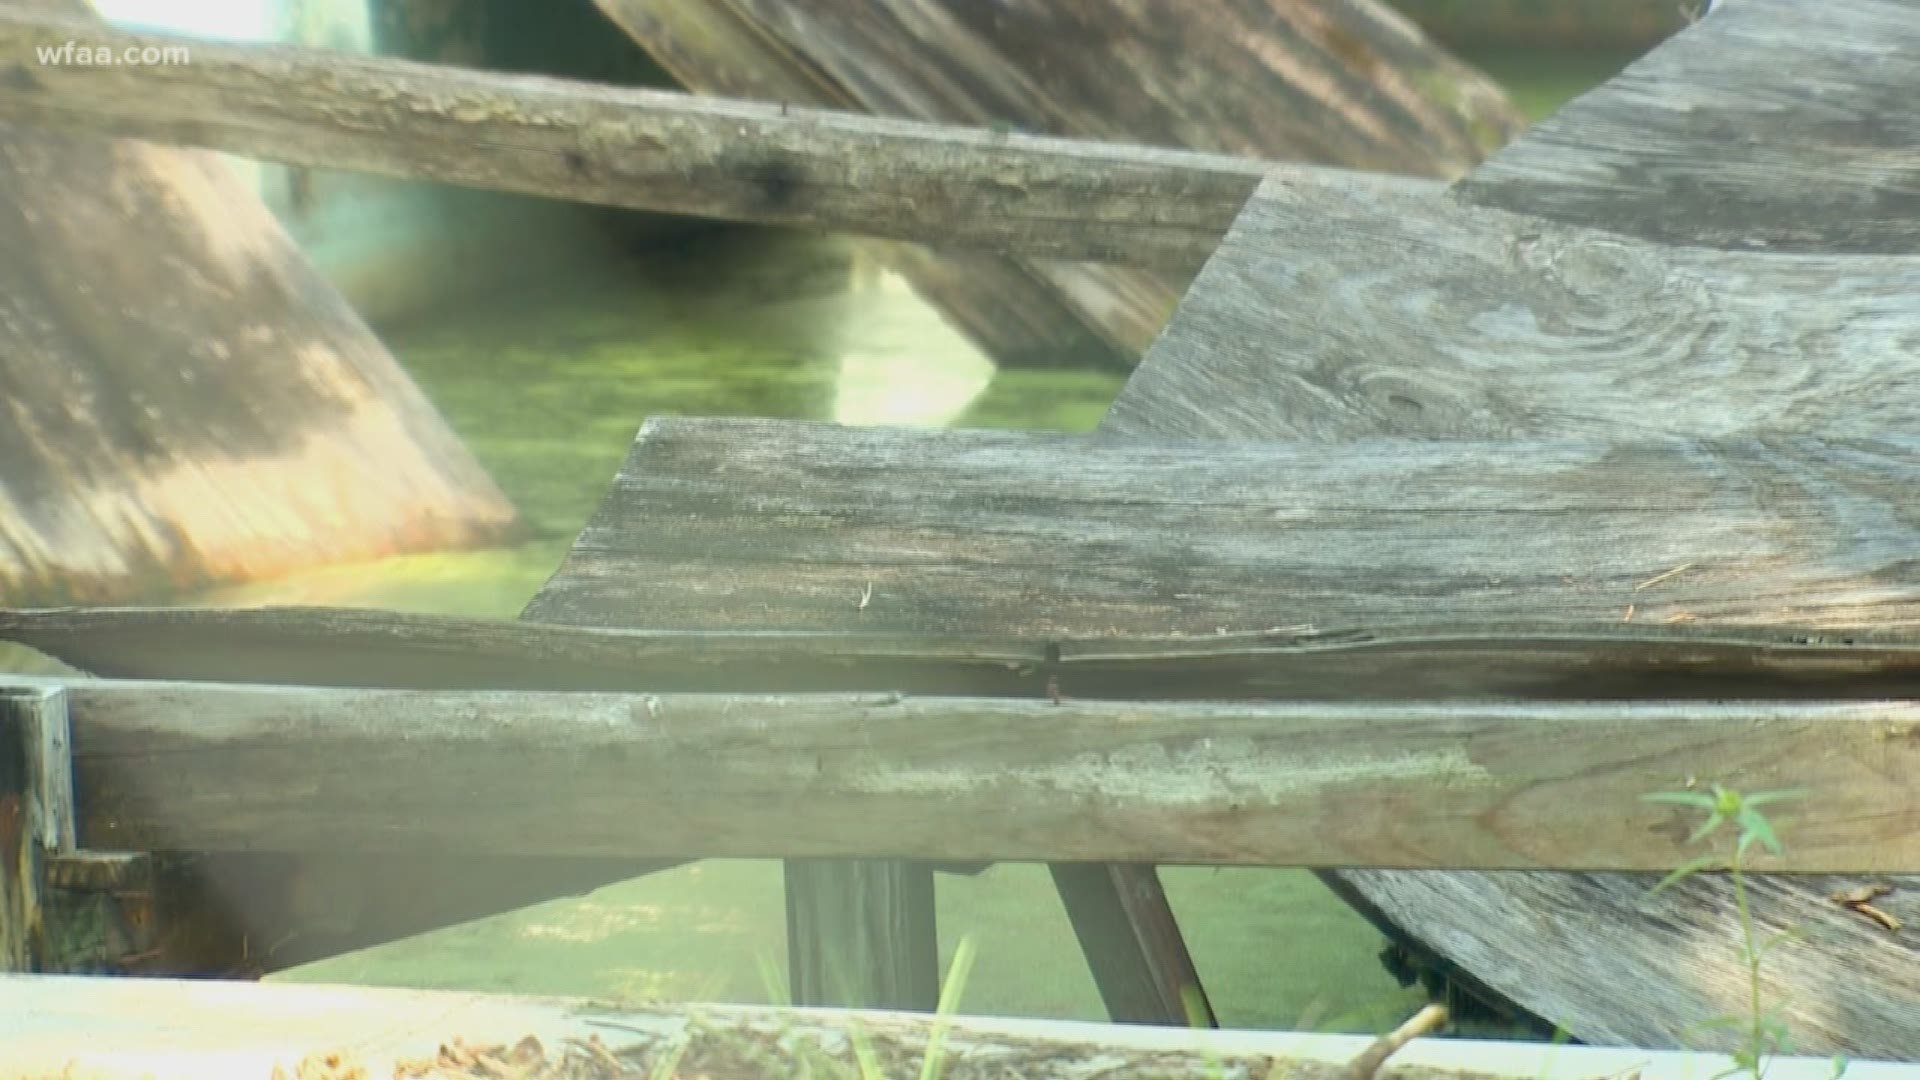 Neighbors in the Cedar Crest community fear an old pool filled with green and murky standing water has become a breeding ground for mosquitos.